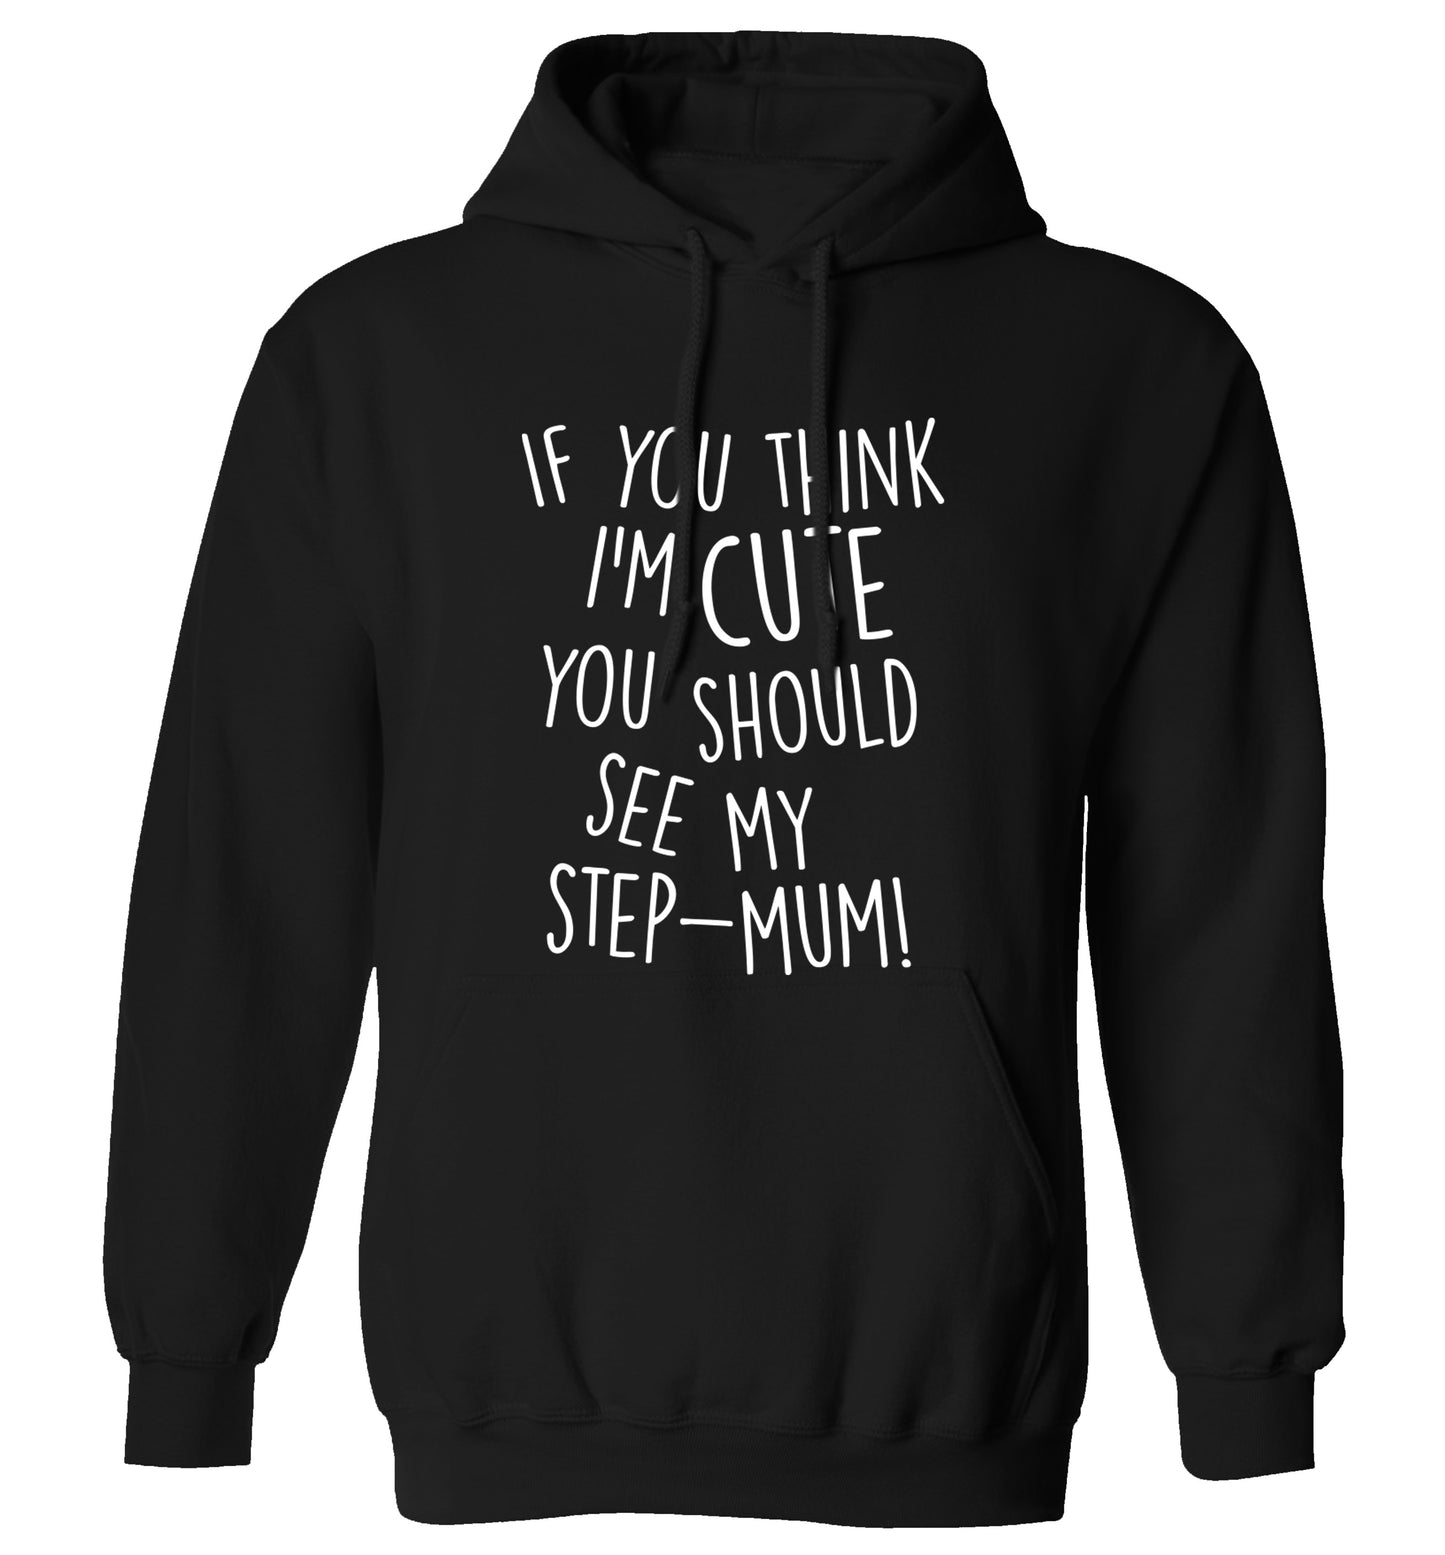 If you think I'm cute you should see my step-mum adults unisex black hoodie 2XL